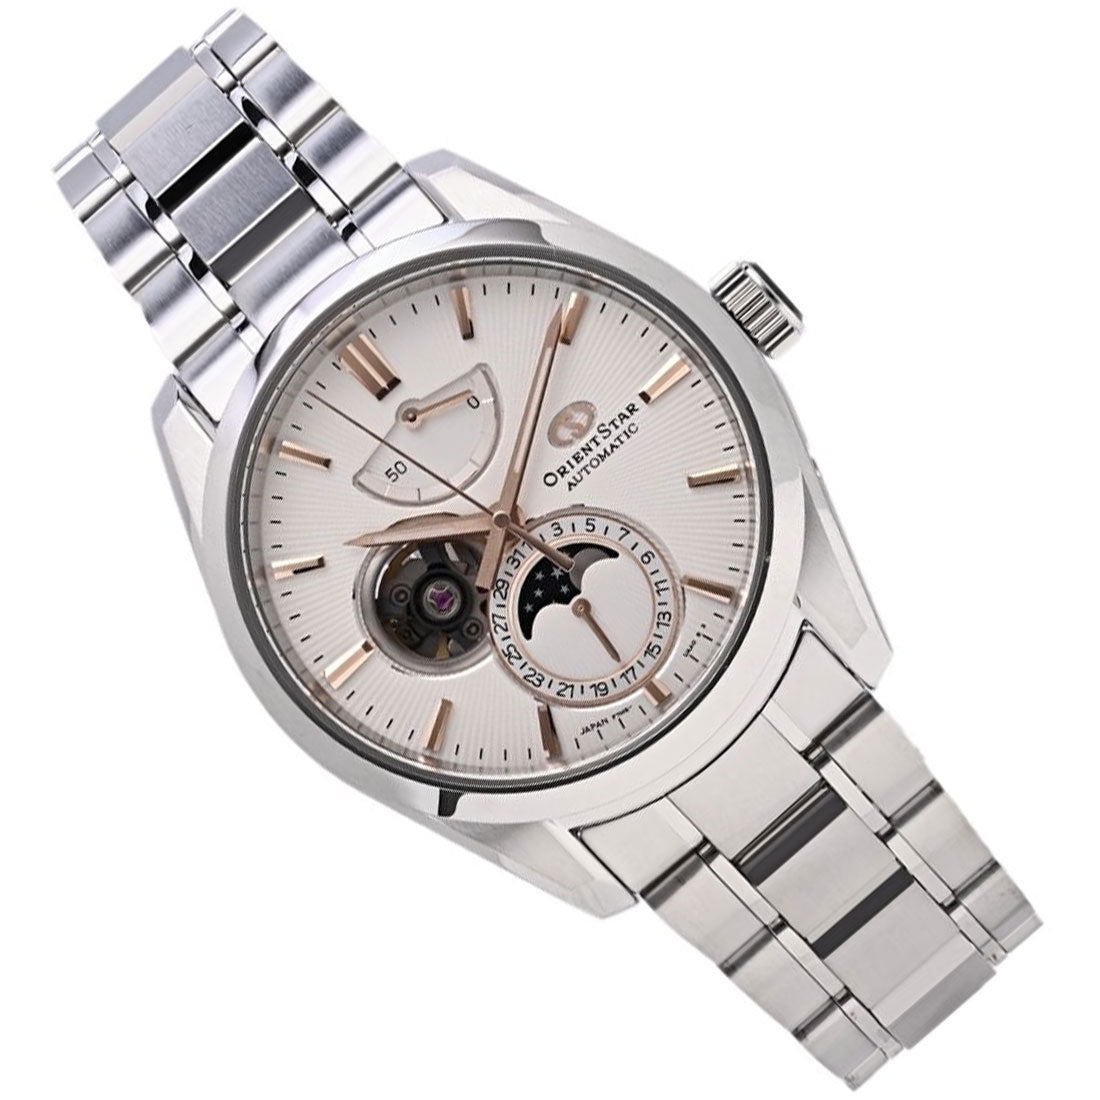 Orient Star Moon Phase White Dial RE-AY0003S RE-AY0003S00B Dress Watch -Orient